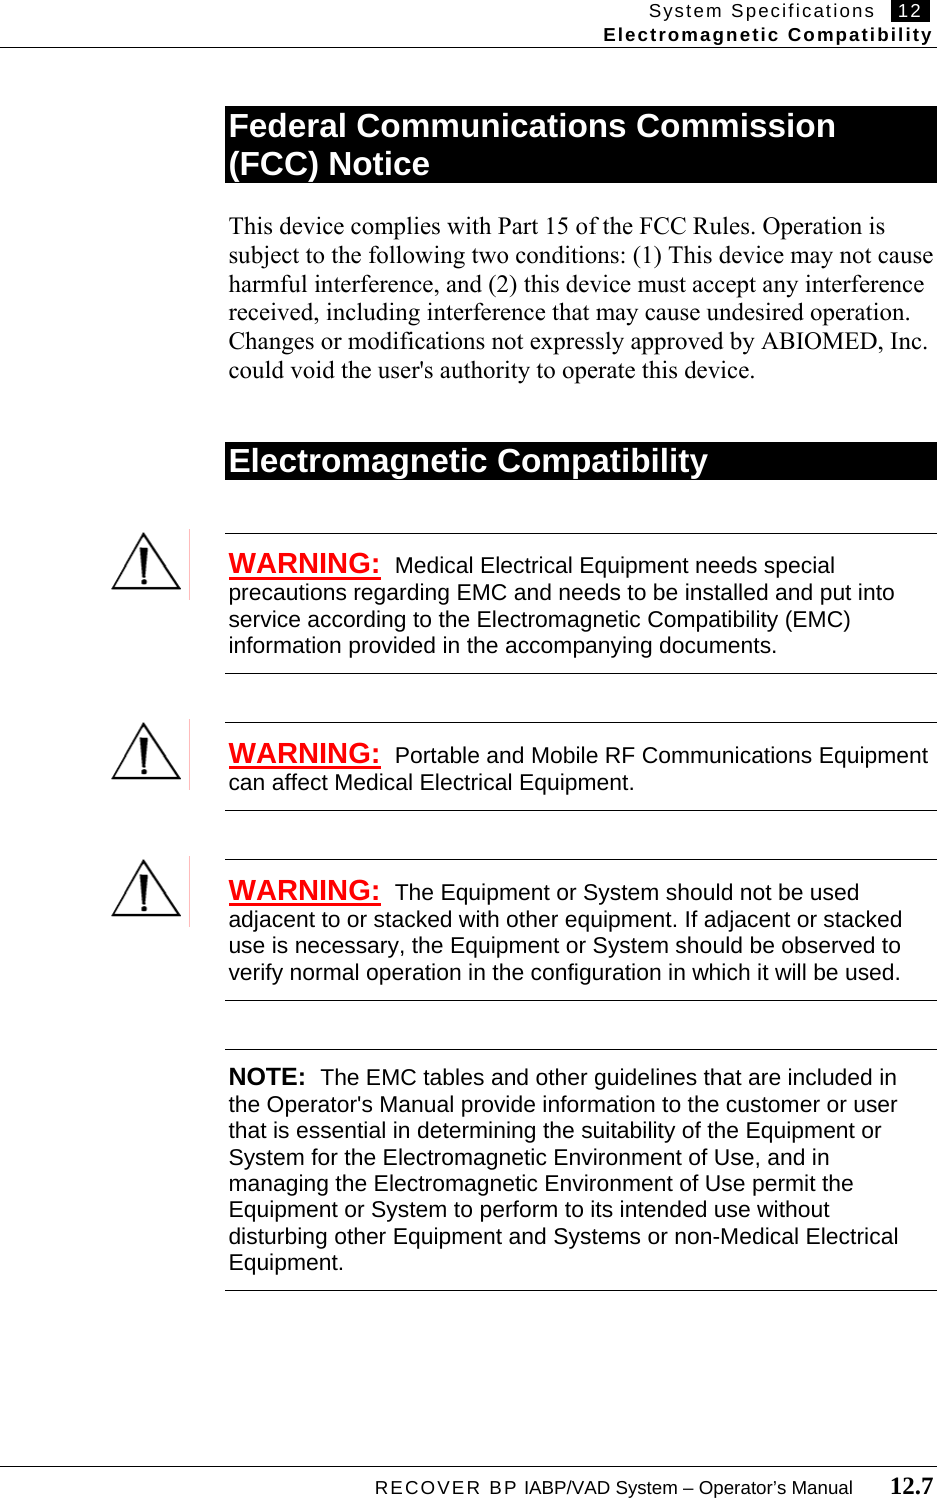 System Specifications   12   Electromagnetic Compatibility  RECOVER BP IABP/VAD System – Operator’s Manual       12.7  Federal Communications Commission (FCC) Notice  This device complies with Part 15 of the FCC Rules. Operation is subject to the following two conditions: (1) This device may not cause harmful interference, and (2) this device must accept any interference received, including interference that may cause undesired operation. Changes or modifications not expressly approved by ABIOMED, Inc. could void the user&apos;s authority to operate this device.   Electromagnetic Compatibility   WARNING:  Medical Electrical Equipment needs special precautions regarding EMC and needs to be installed and put into service according to the Electromagnetic Compatibility (EMC) information provided in the accompanying documents.   WARNING:  Portable and Mobile RF Communications Equipment can affect Medical Electrical Equipment.   WARNING:  The Equipment or System should not be used adjacent to or stacked with other equipment. If adjacent or stacked use is necessary, the Equipment or System should be observed to verify normal operation in the configuration in which it will be used.   NOTE:  The EMC tables and other guidelines that are included in the Operator&apos;s Manual provide information to the customer or user that is essential in determining the suitability of the Equipment or System for the Electromagnetic Environment of Use, and in managing the Electromagnetic Environment of Use permit the Equipment or System to perform to its intended use without disturbing other Equipment and Systems or non-Medical Electrical Equipment.         